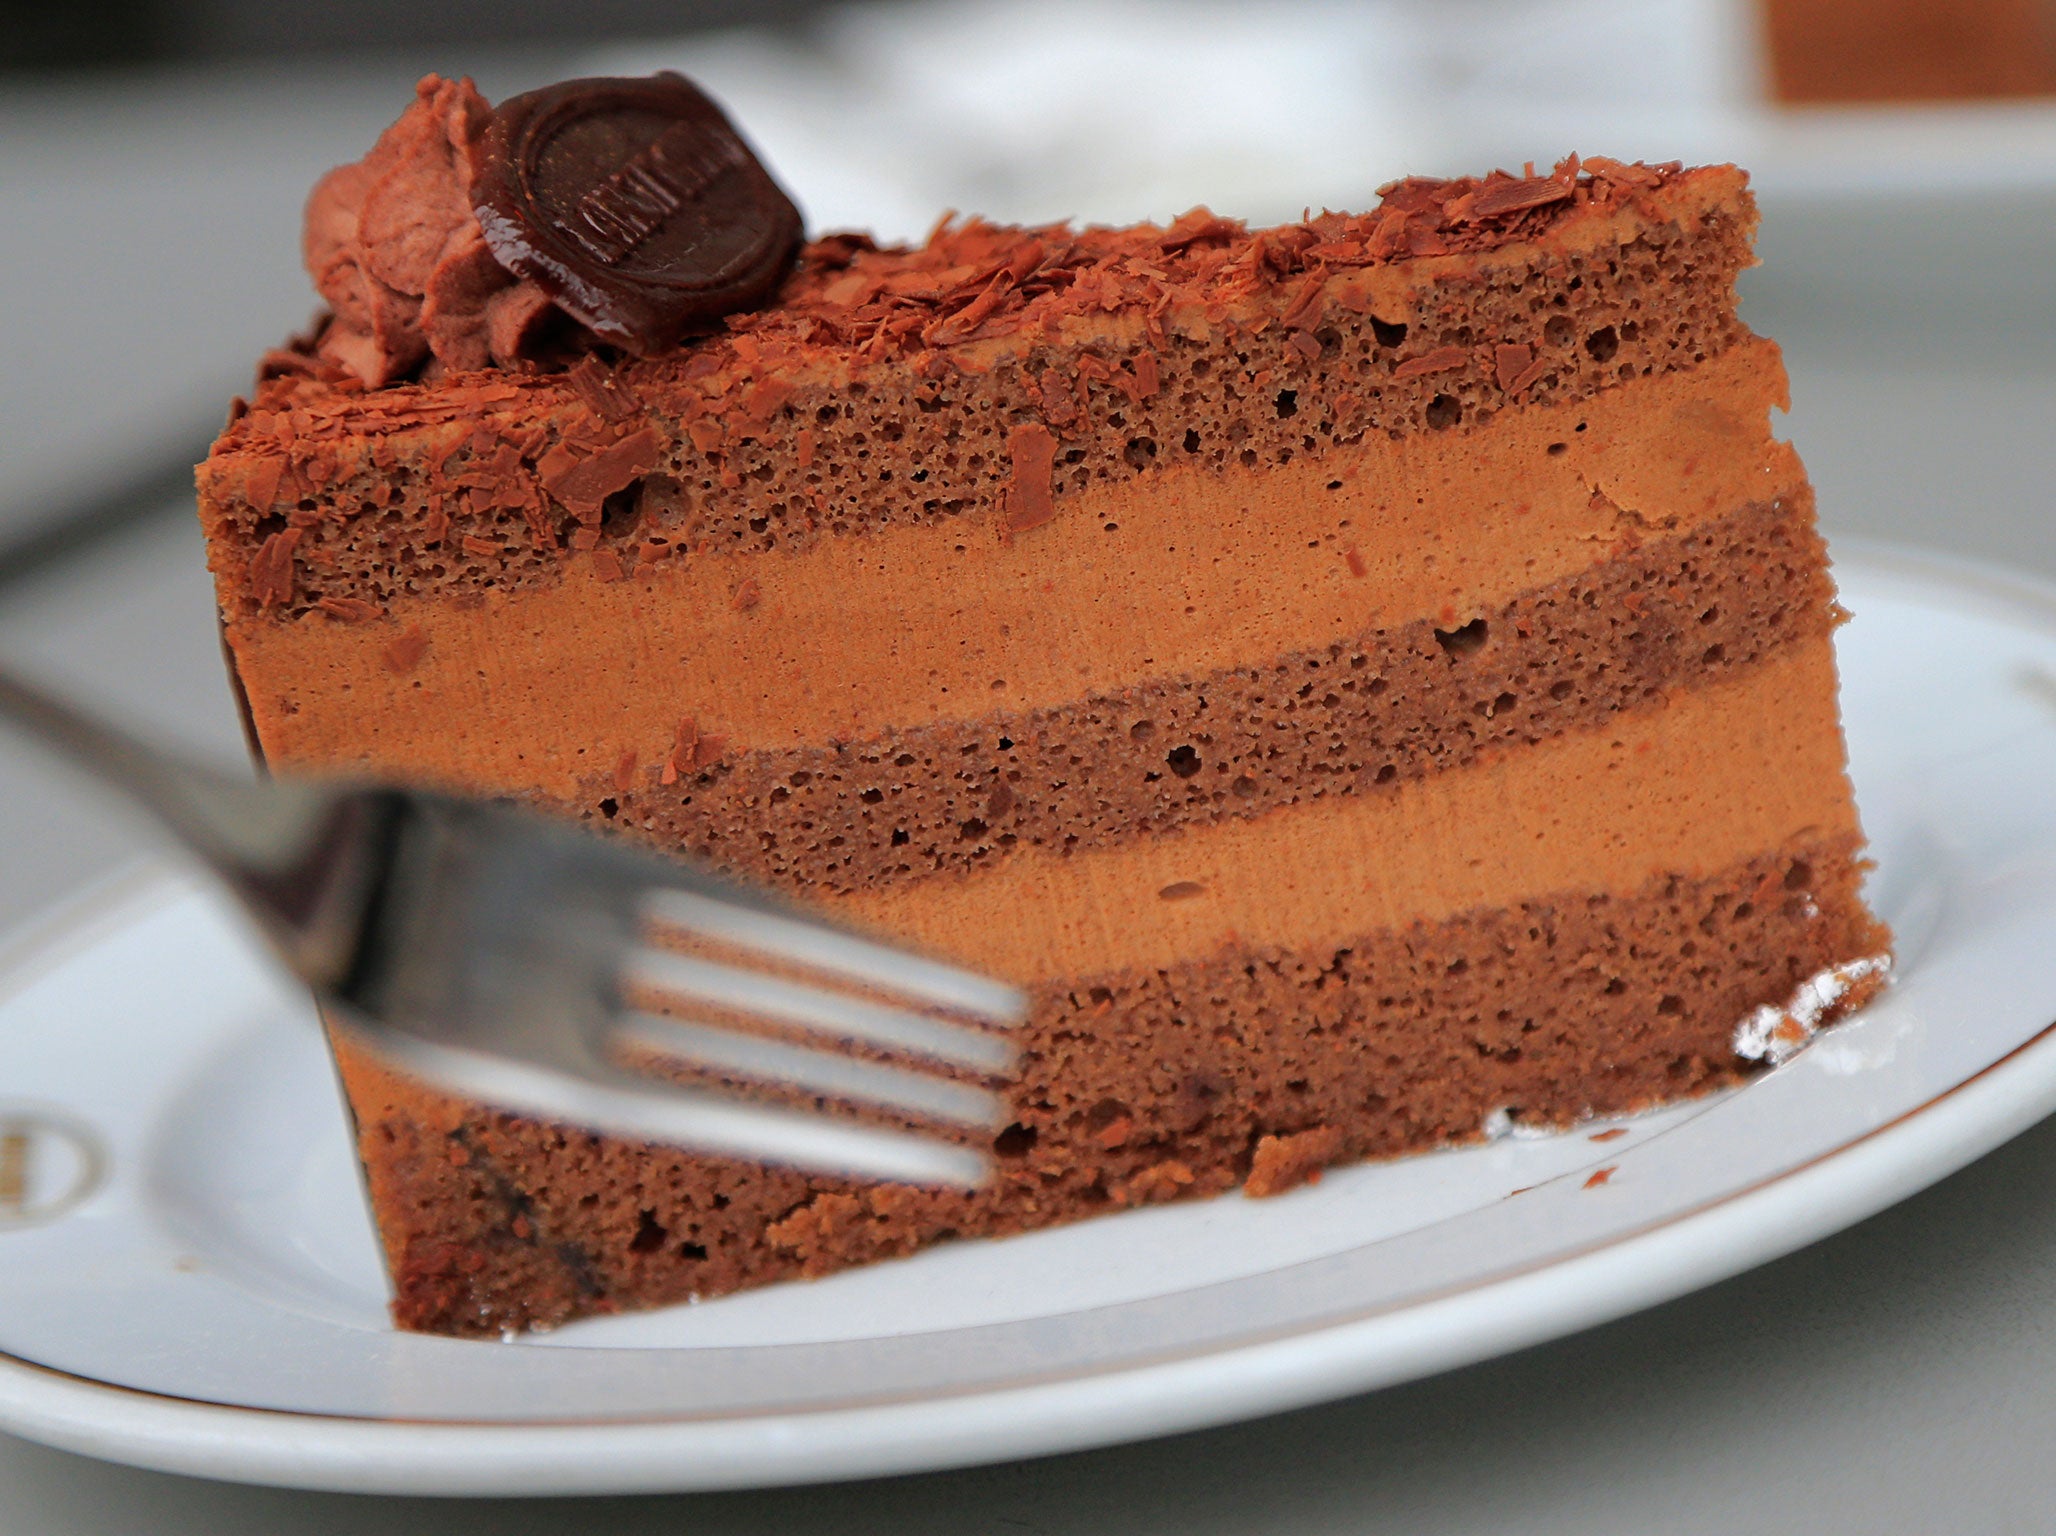 Make of us love chocolate cake - but why?